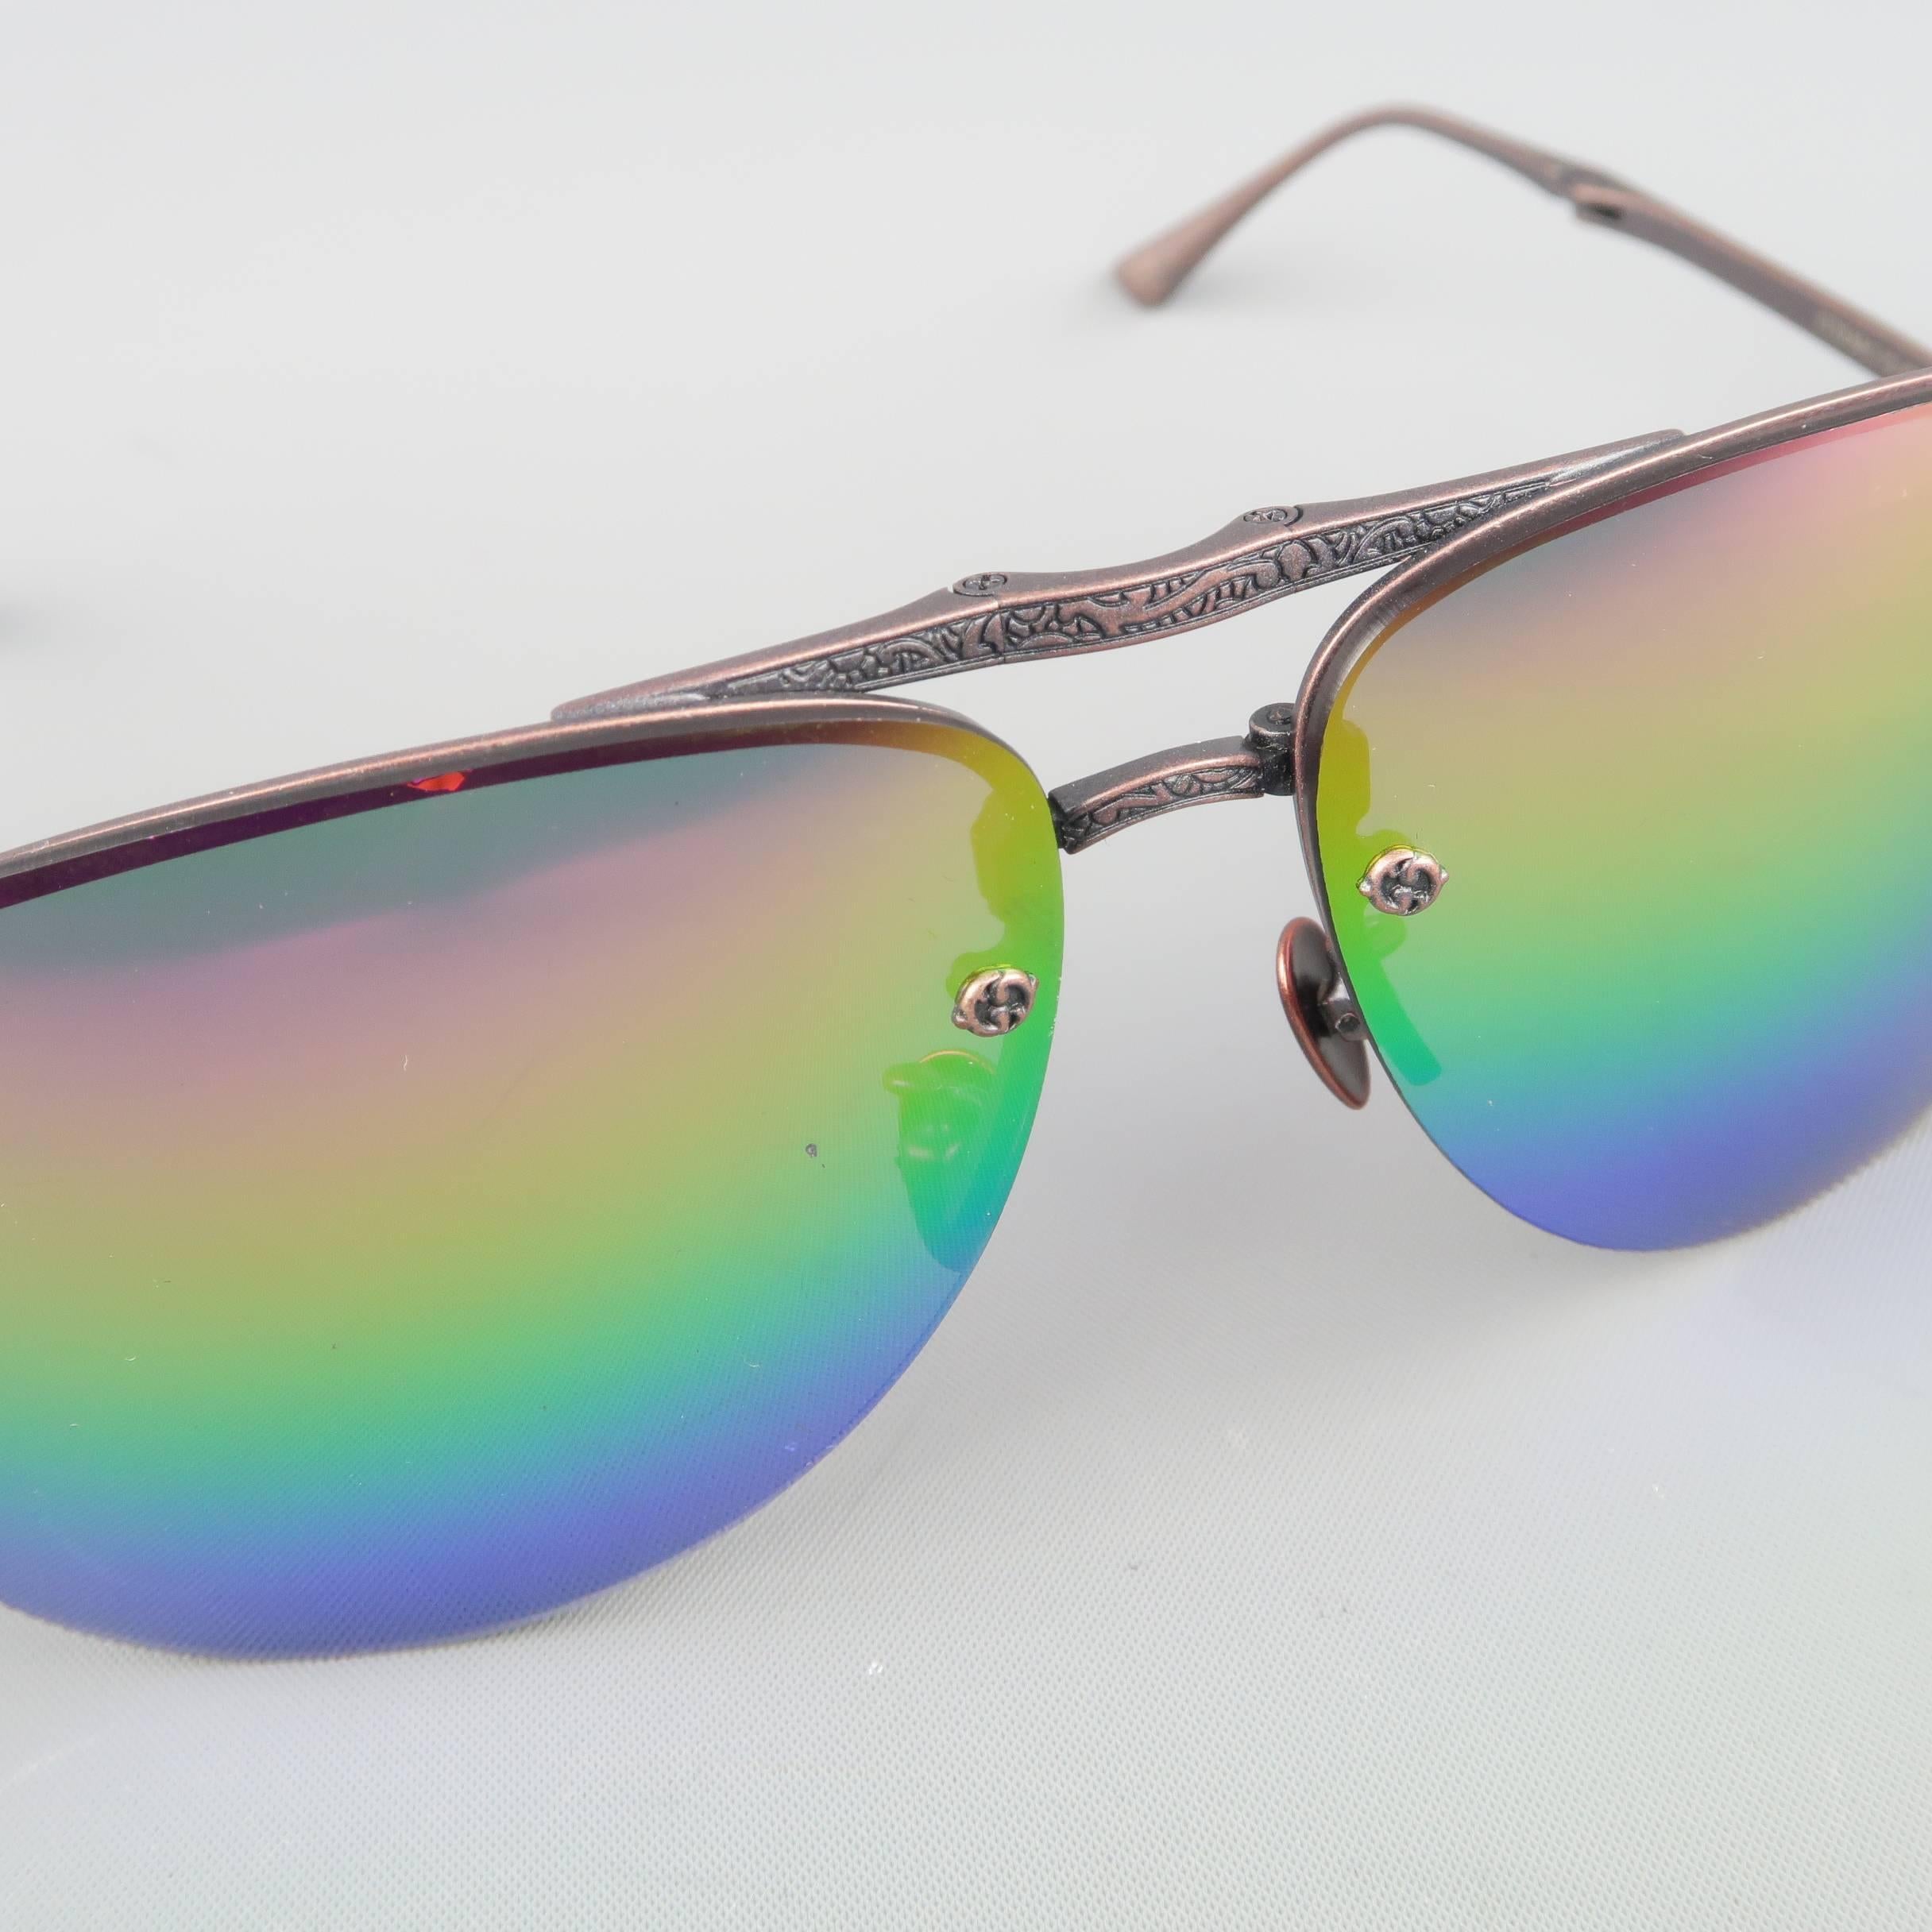 LOTOS aviators come in ornate engraves copper tone titanium with metallic rainbow gradient lenses and fold up construction. Handmade in  Germany.
 
Good Pre-Owned Condition.
Marked: LT23 64 12-137
 
Measurements:
 
Length: 13.5 cm.
Height: 5.5 cm.